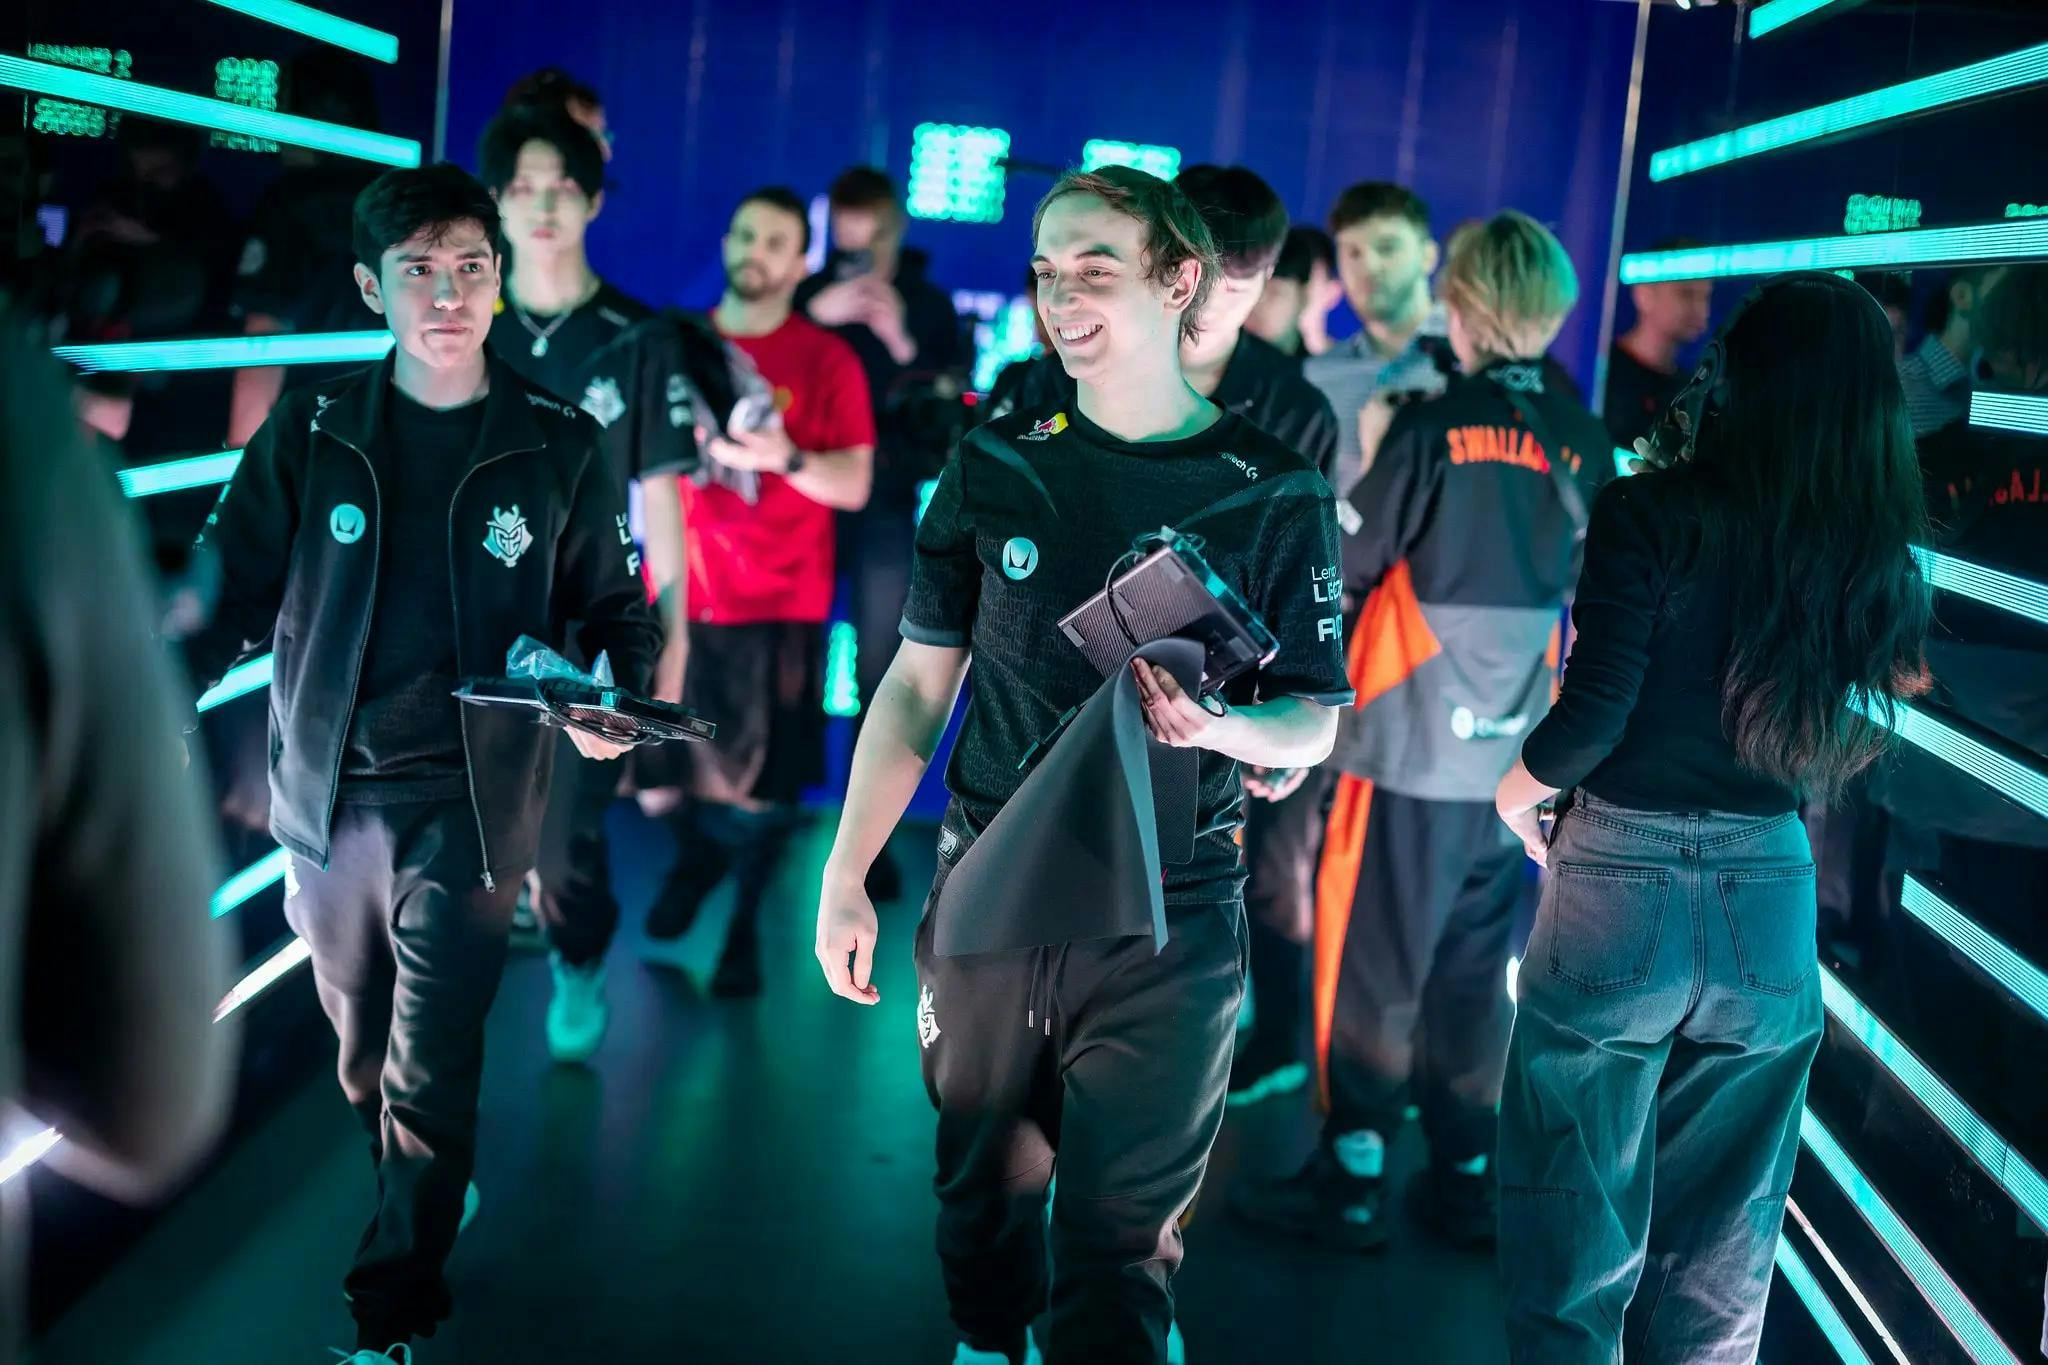 G2 Caps, walking onto the LEC stage with his team. Credit: Michal Konkol/Riot Games